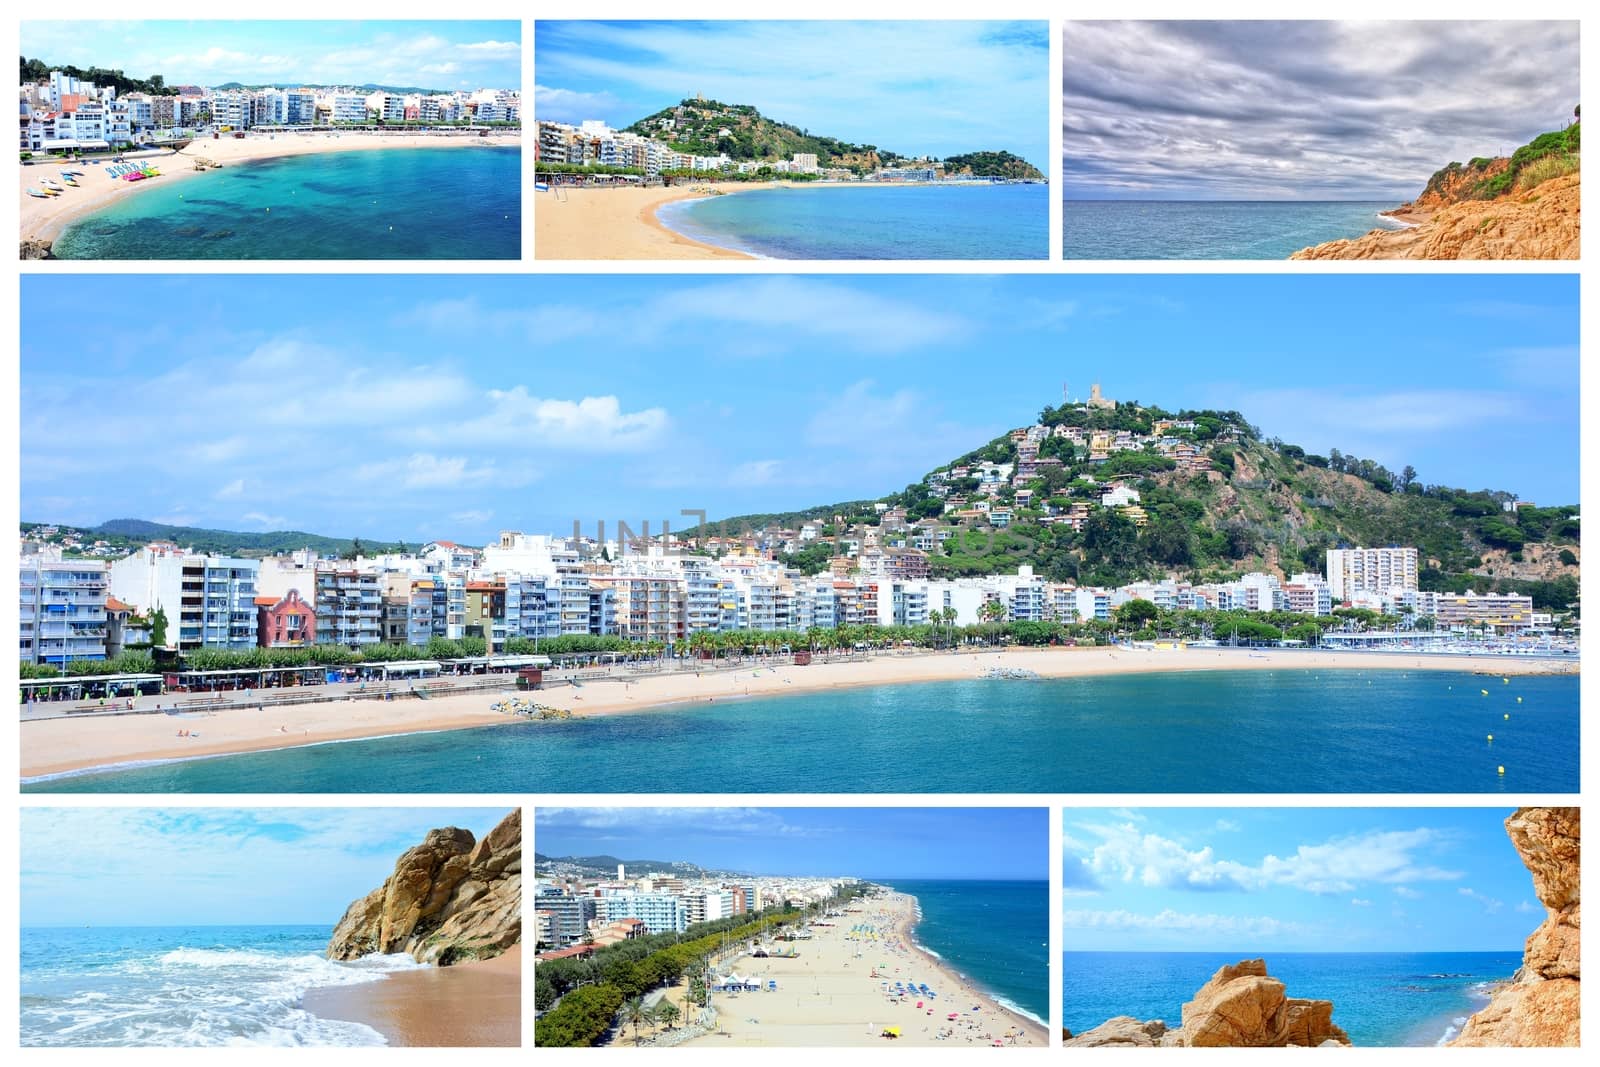 Photo collage with places of Costa Brava. Catalonia beaches, Calella and Blanes town in Spain. Ideal for use as postcard or in travel catalog.